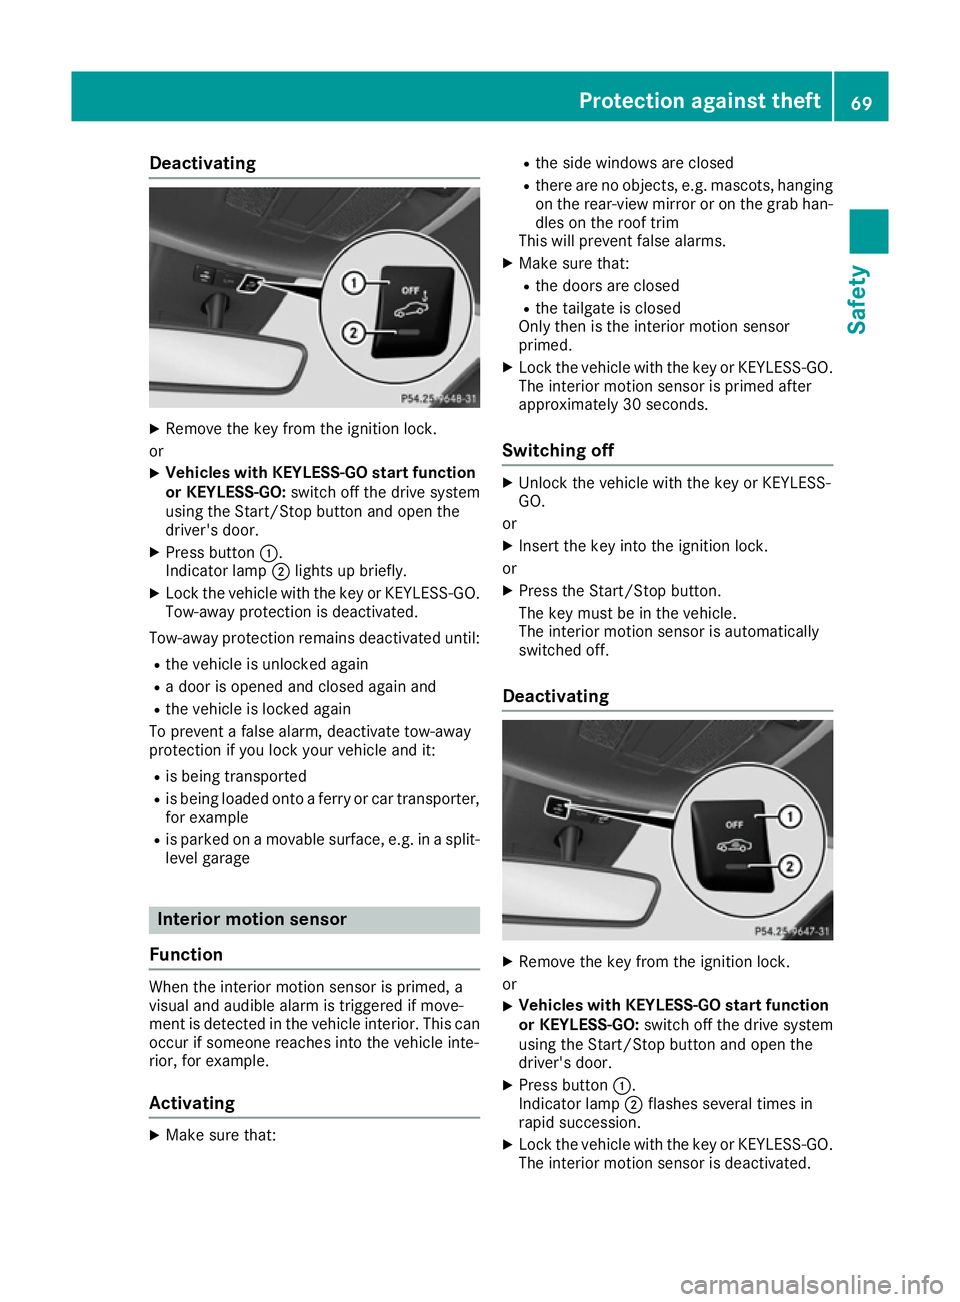 MERCEDES-BENZ B-CLASS HATCHBACK 2015  Owners Manual Deactivating
X
Remove the key from the ignition lock.
or X Vehicles with KEYLESS-GO start function
or KEYLESS-GO: switch off the drive system
using the Start/Stop button and open the
driver's door